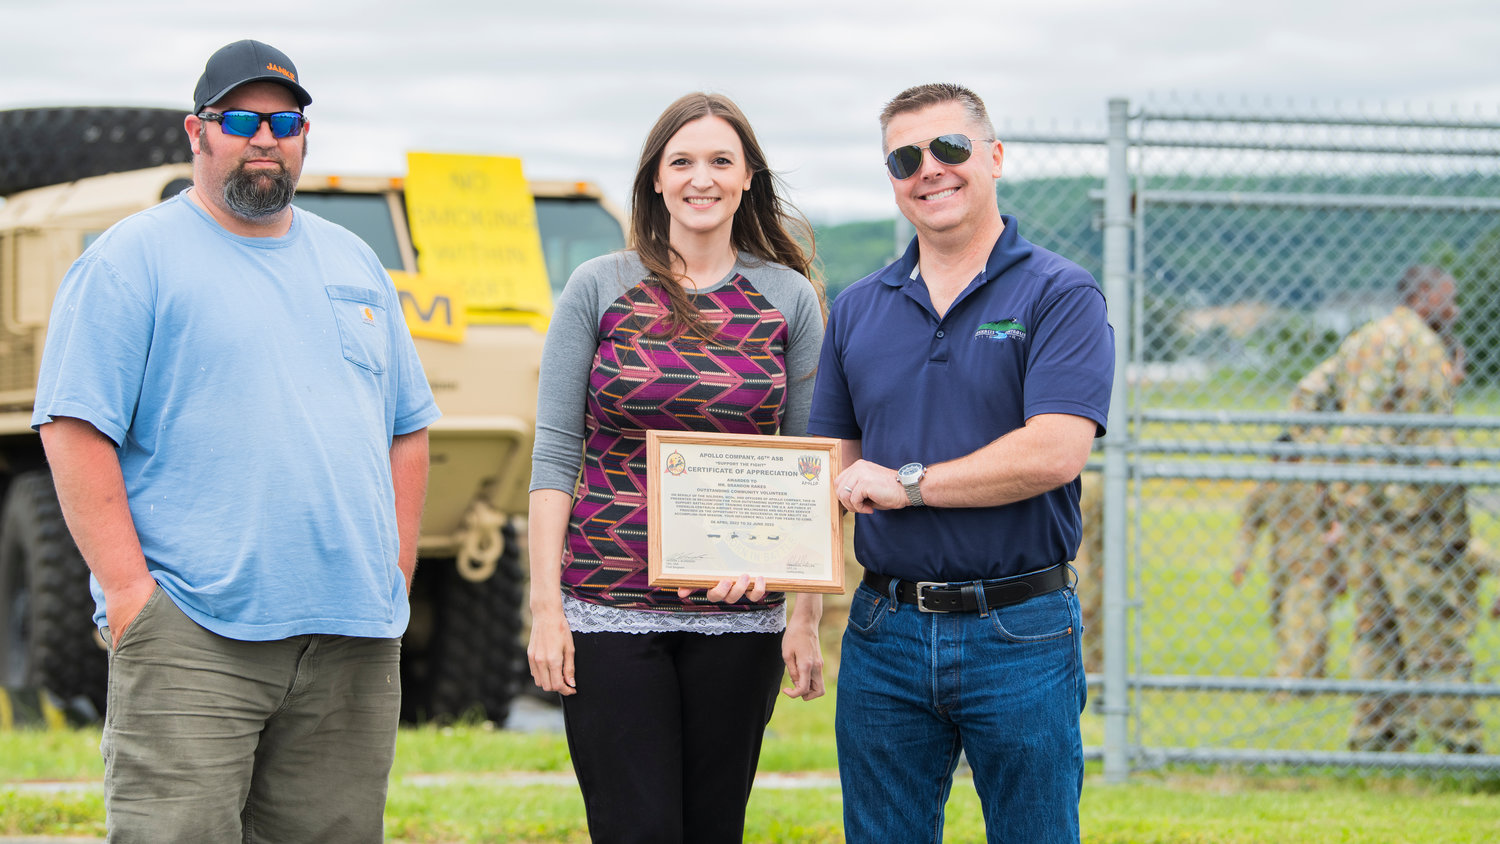 From left, Austin Barnes, Tara Sawyer, and Brandon Rakes pose for a photo with a certificate of appreciation from Apollo Company at the Chehalis-Centralia Airport during a military training exercise on Wednesday, June 22.